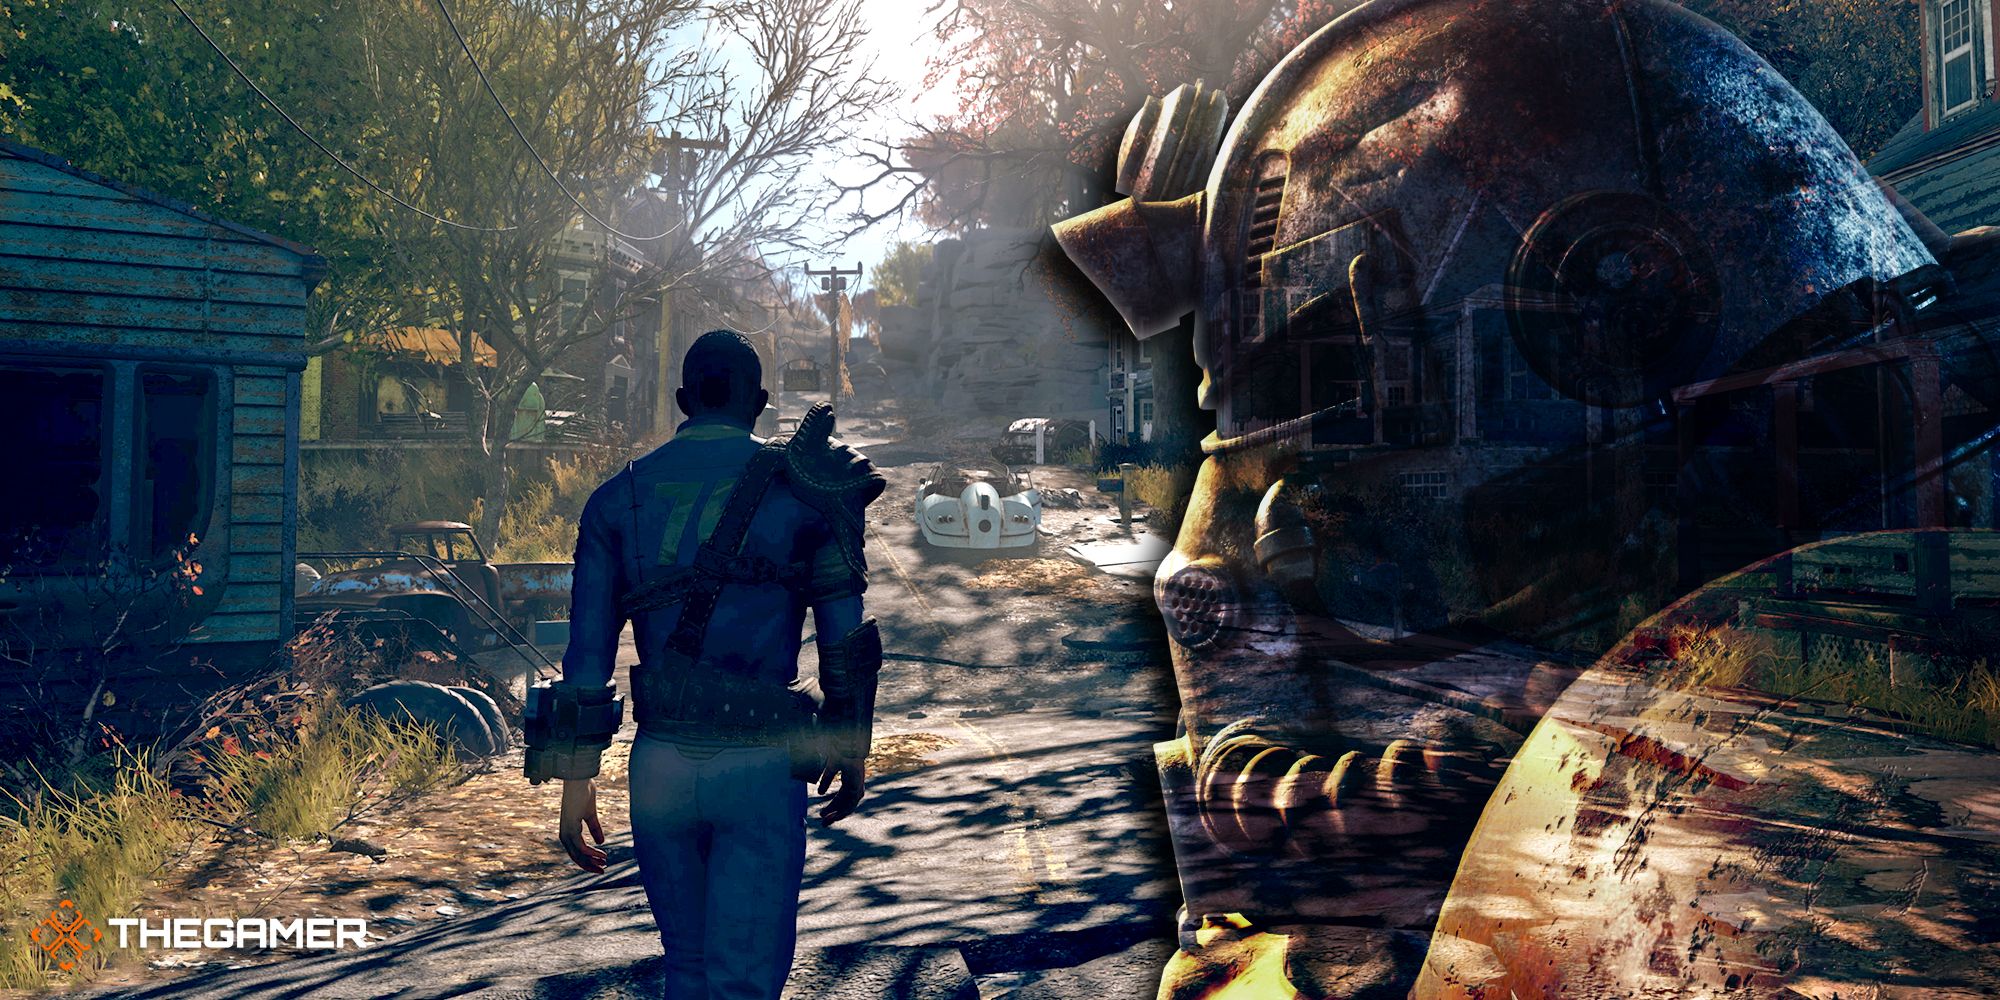 Game art from Fallout 76.